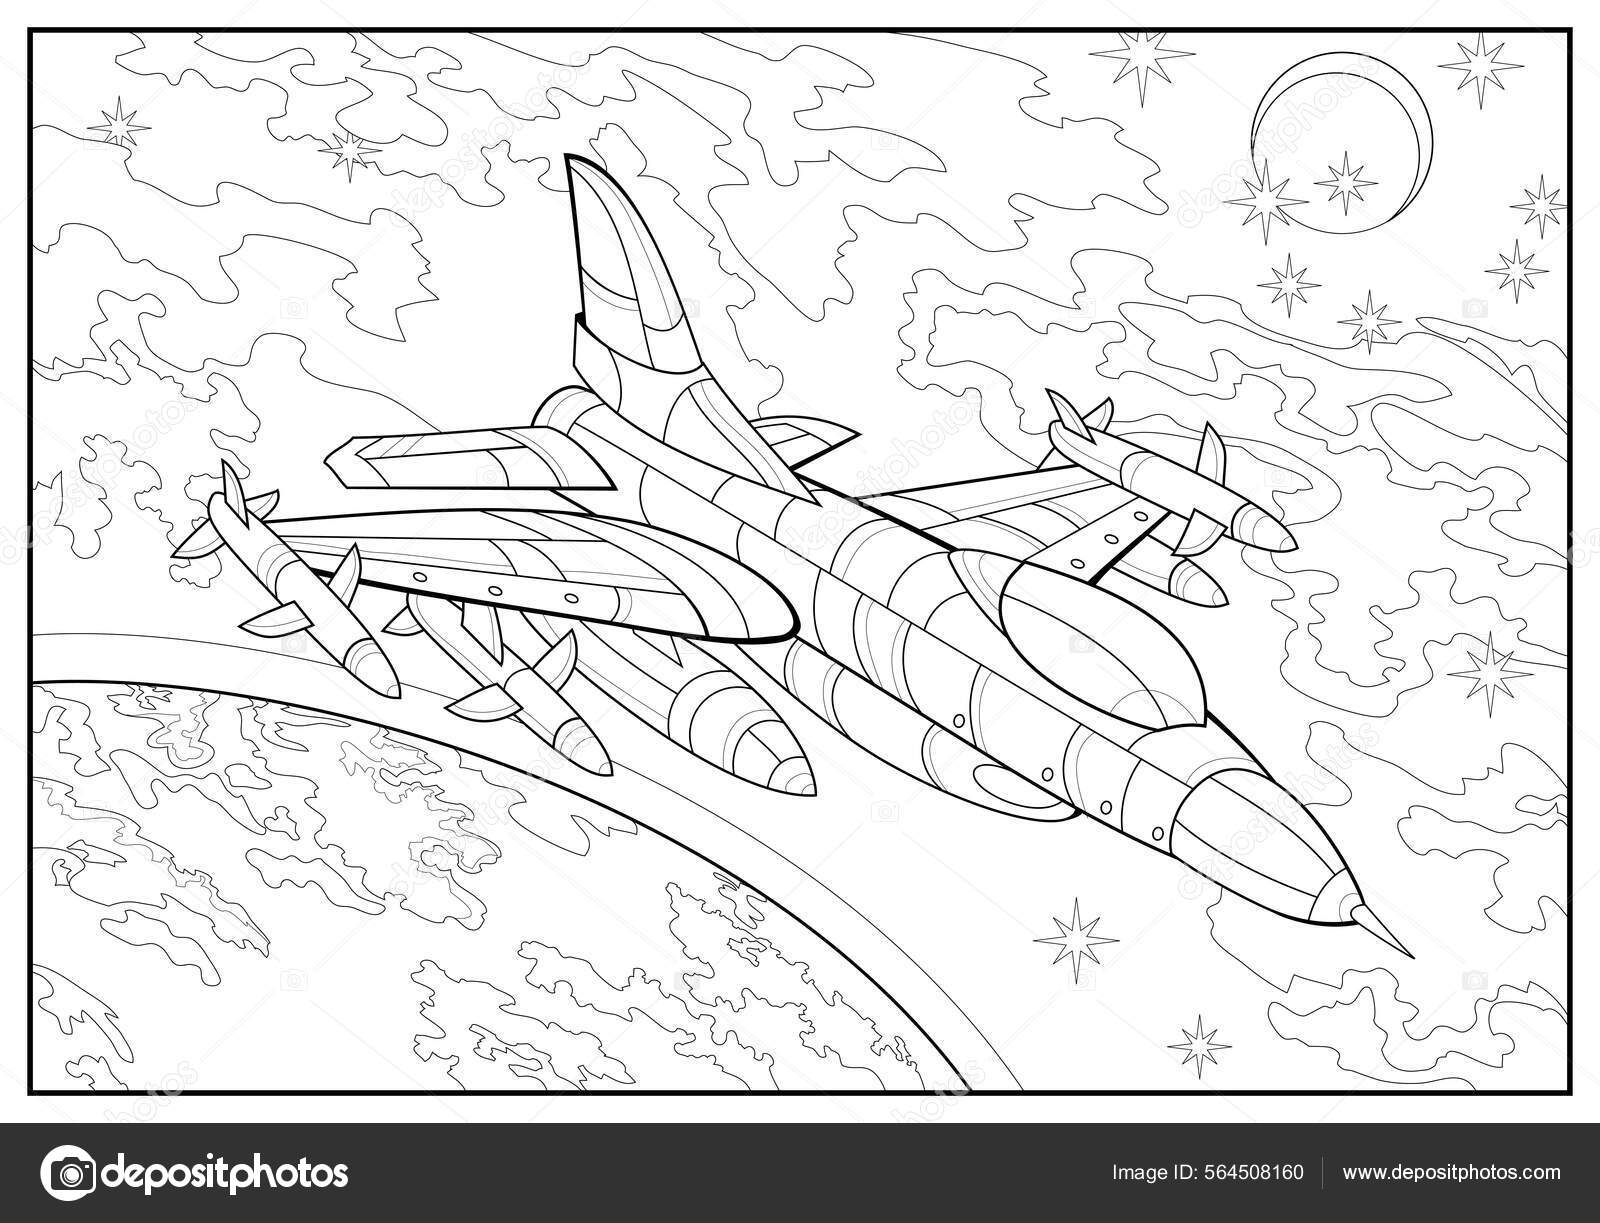 Jet Fighters Dot Line Spiral Coloring Book For Adults